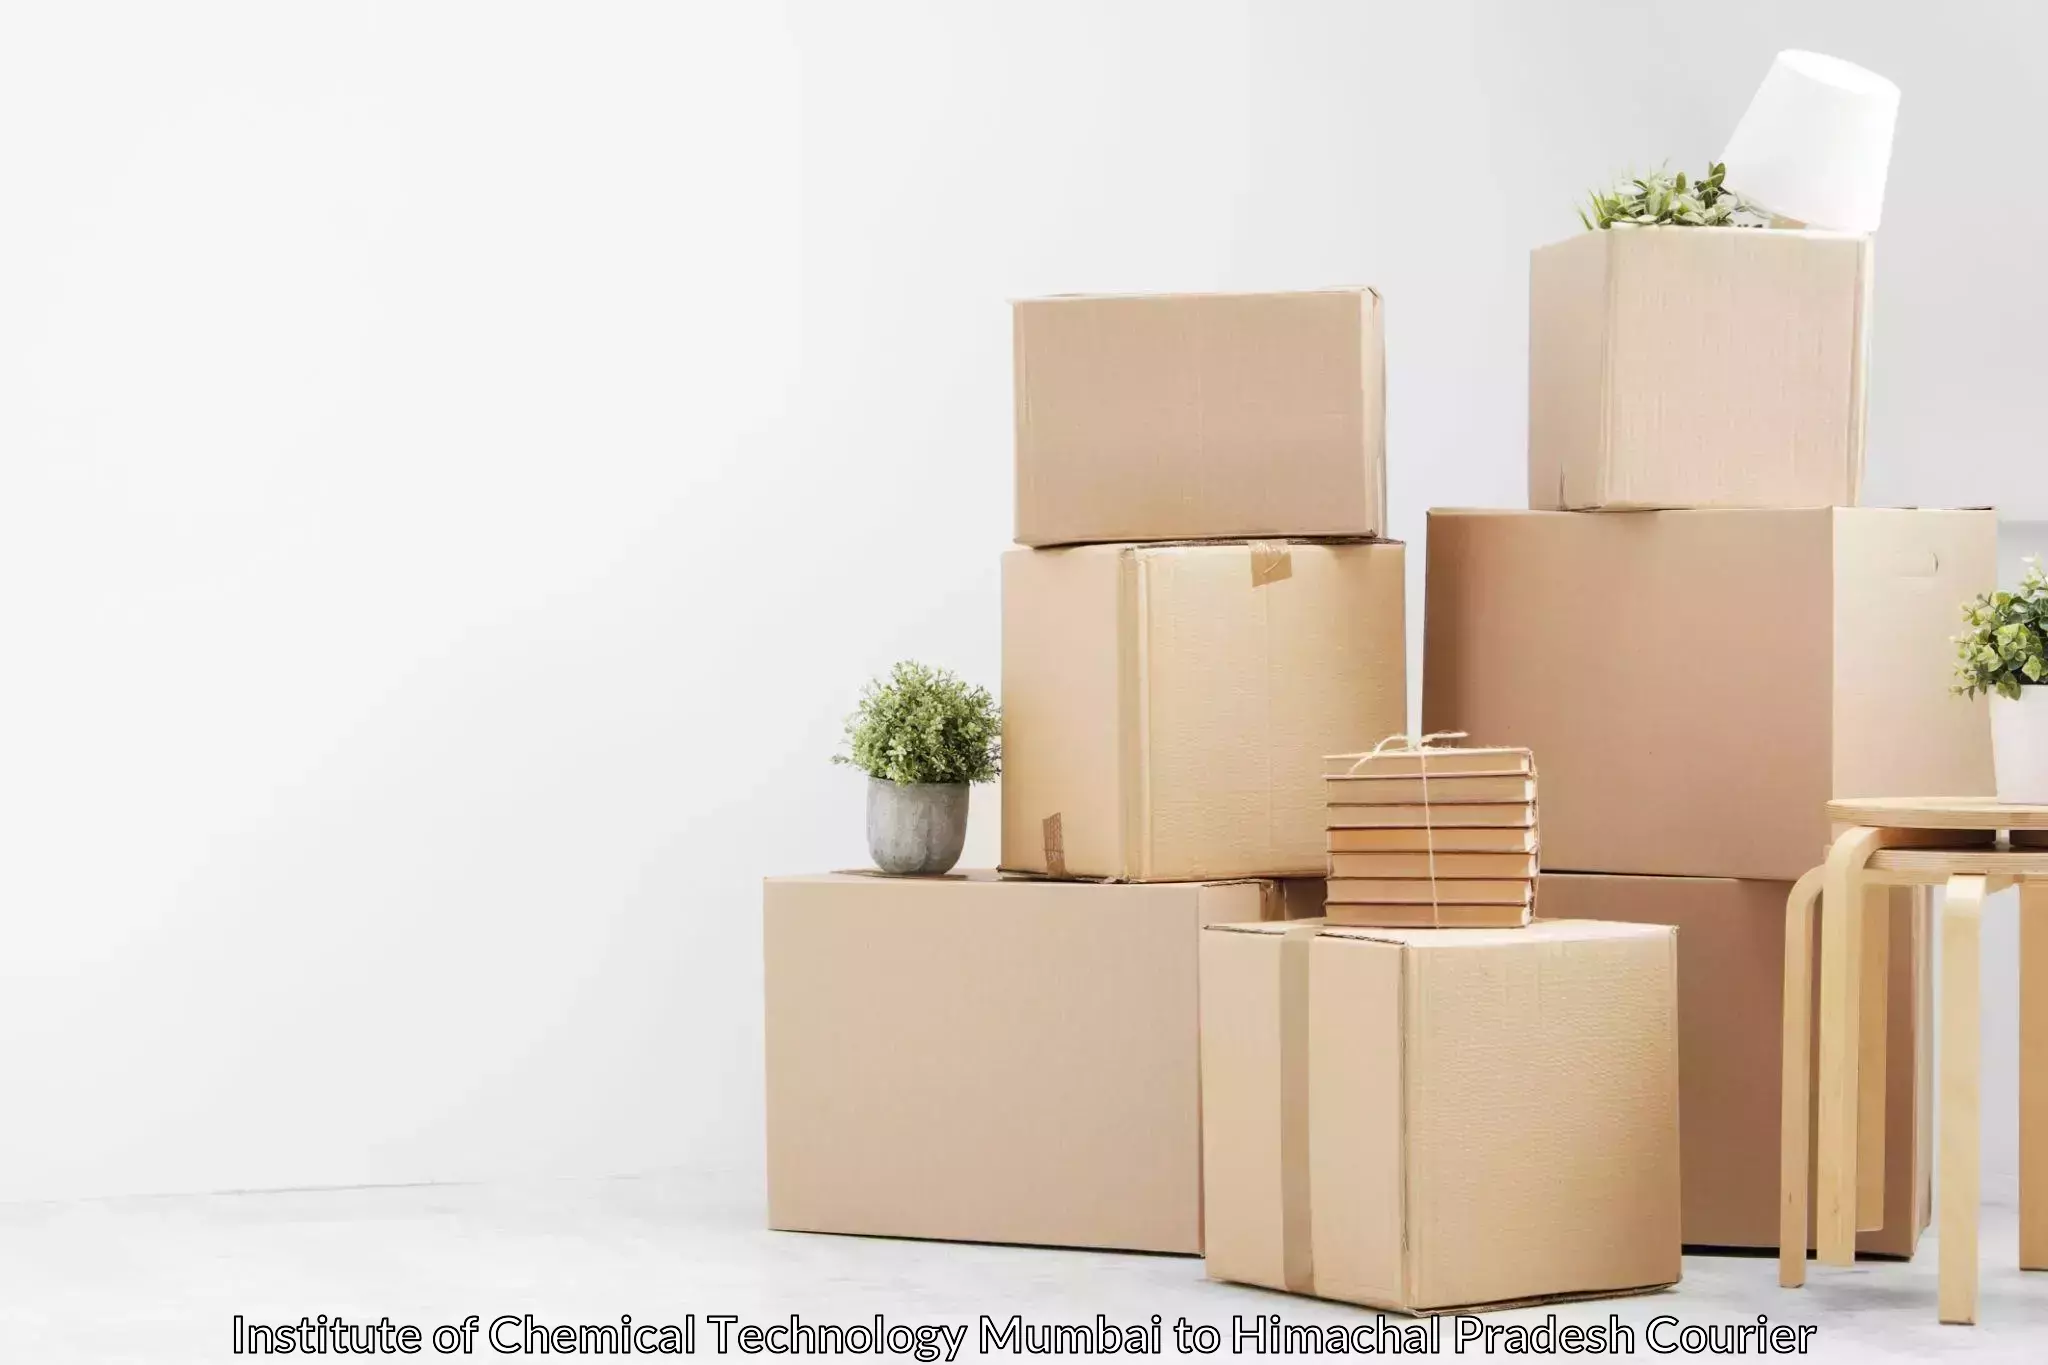 Professional home shifting Institute of Chemical Technology Mumbai to Himachal Pradesh